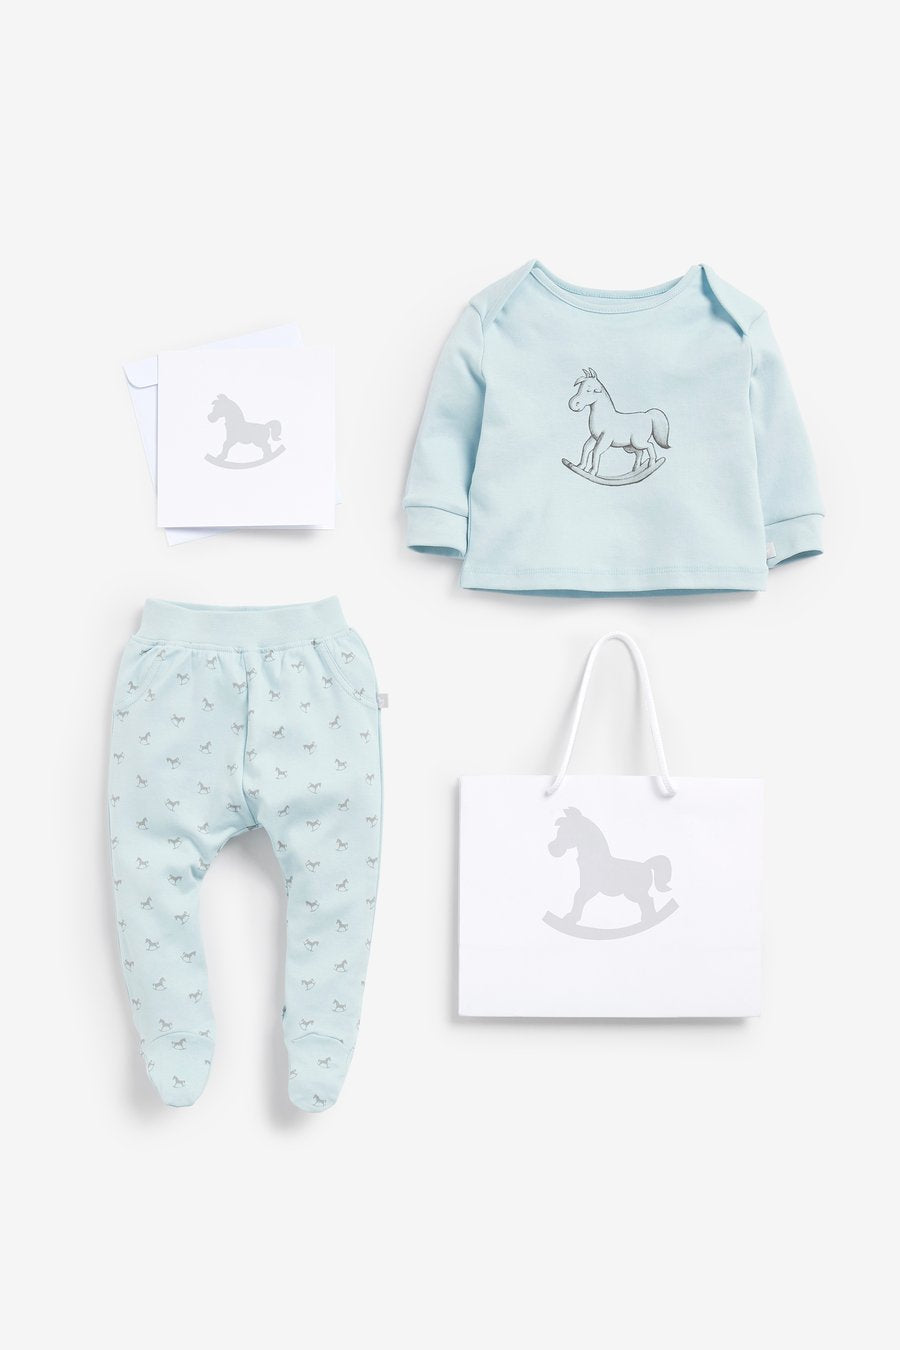 The Little Tailor Top and Pant, Luxury Gift Bag and Card Included - Blue